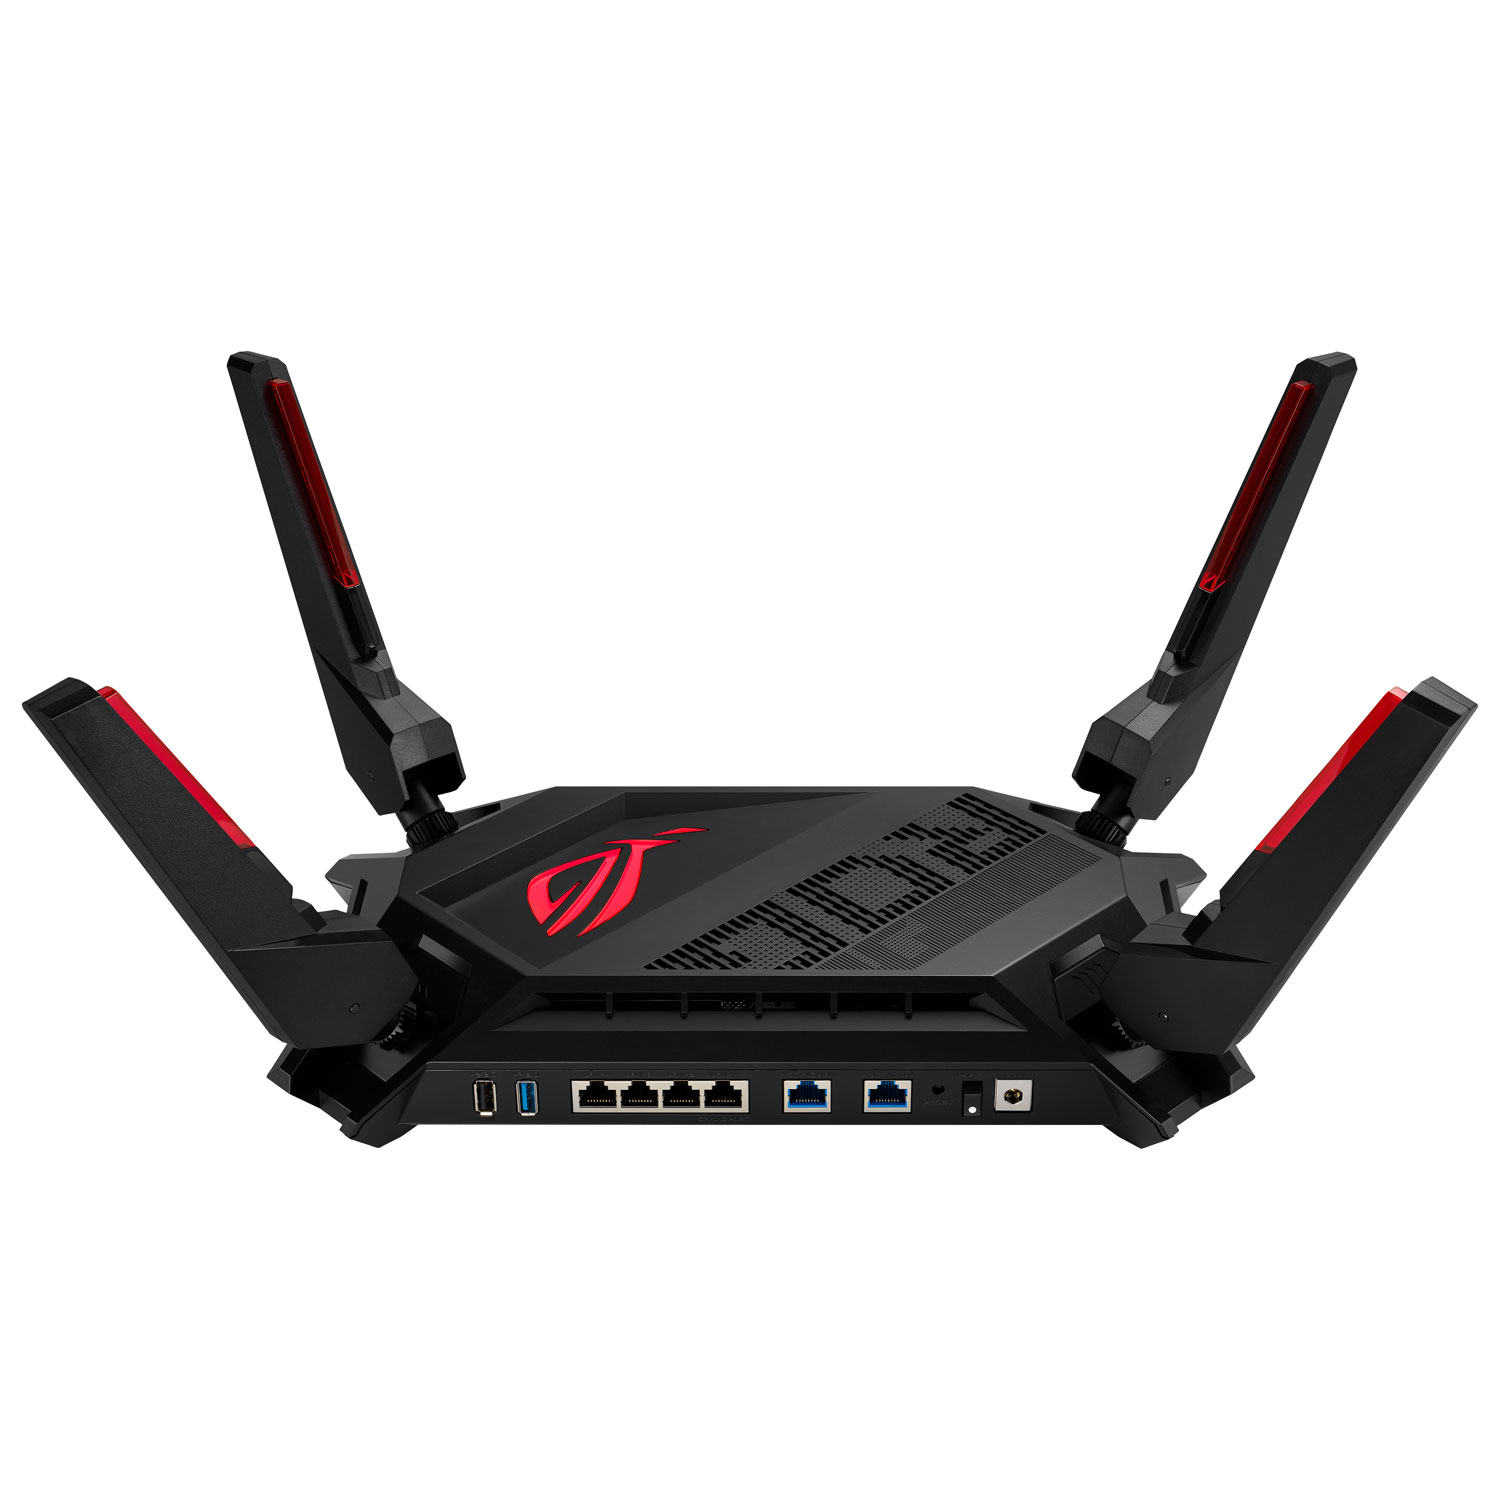 ASUS ROG Rapture Wireless AX-6000 Dual-Band Wi-Fi 6 Router (GT-AX6000)